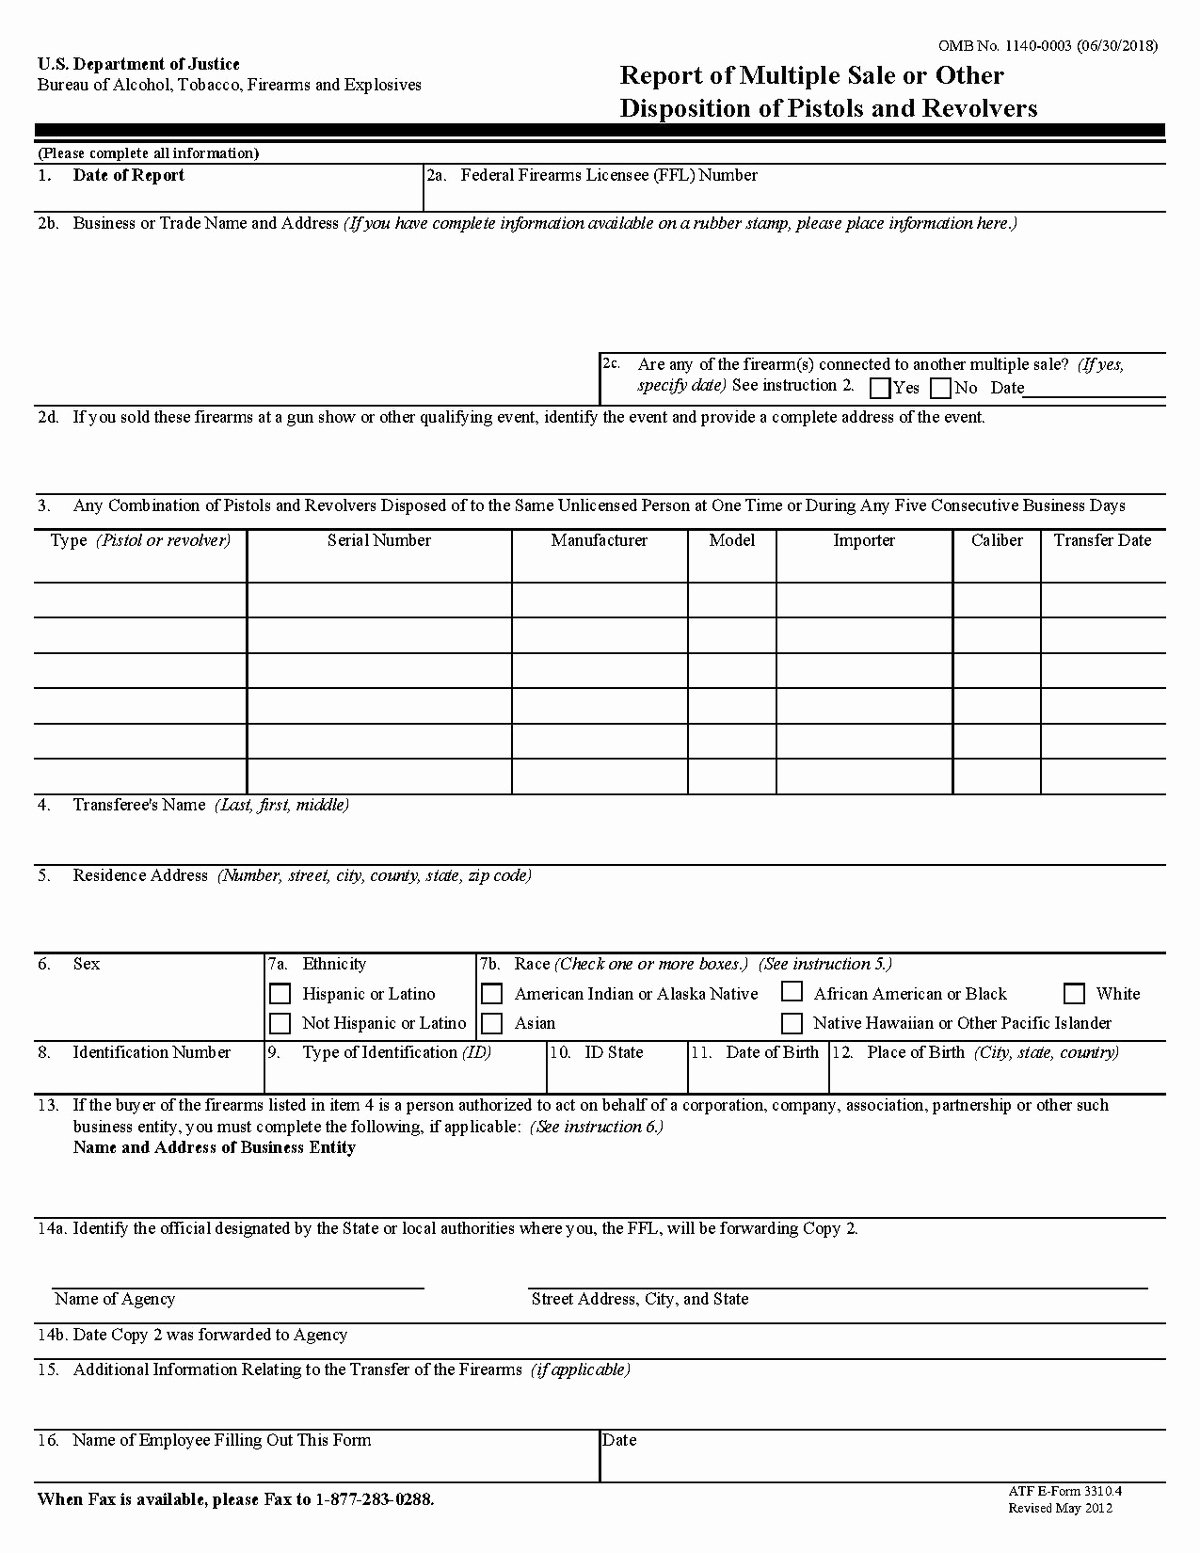 Gun Bill Of Sale Florida Awesome form 3310 4